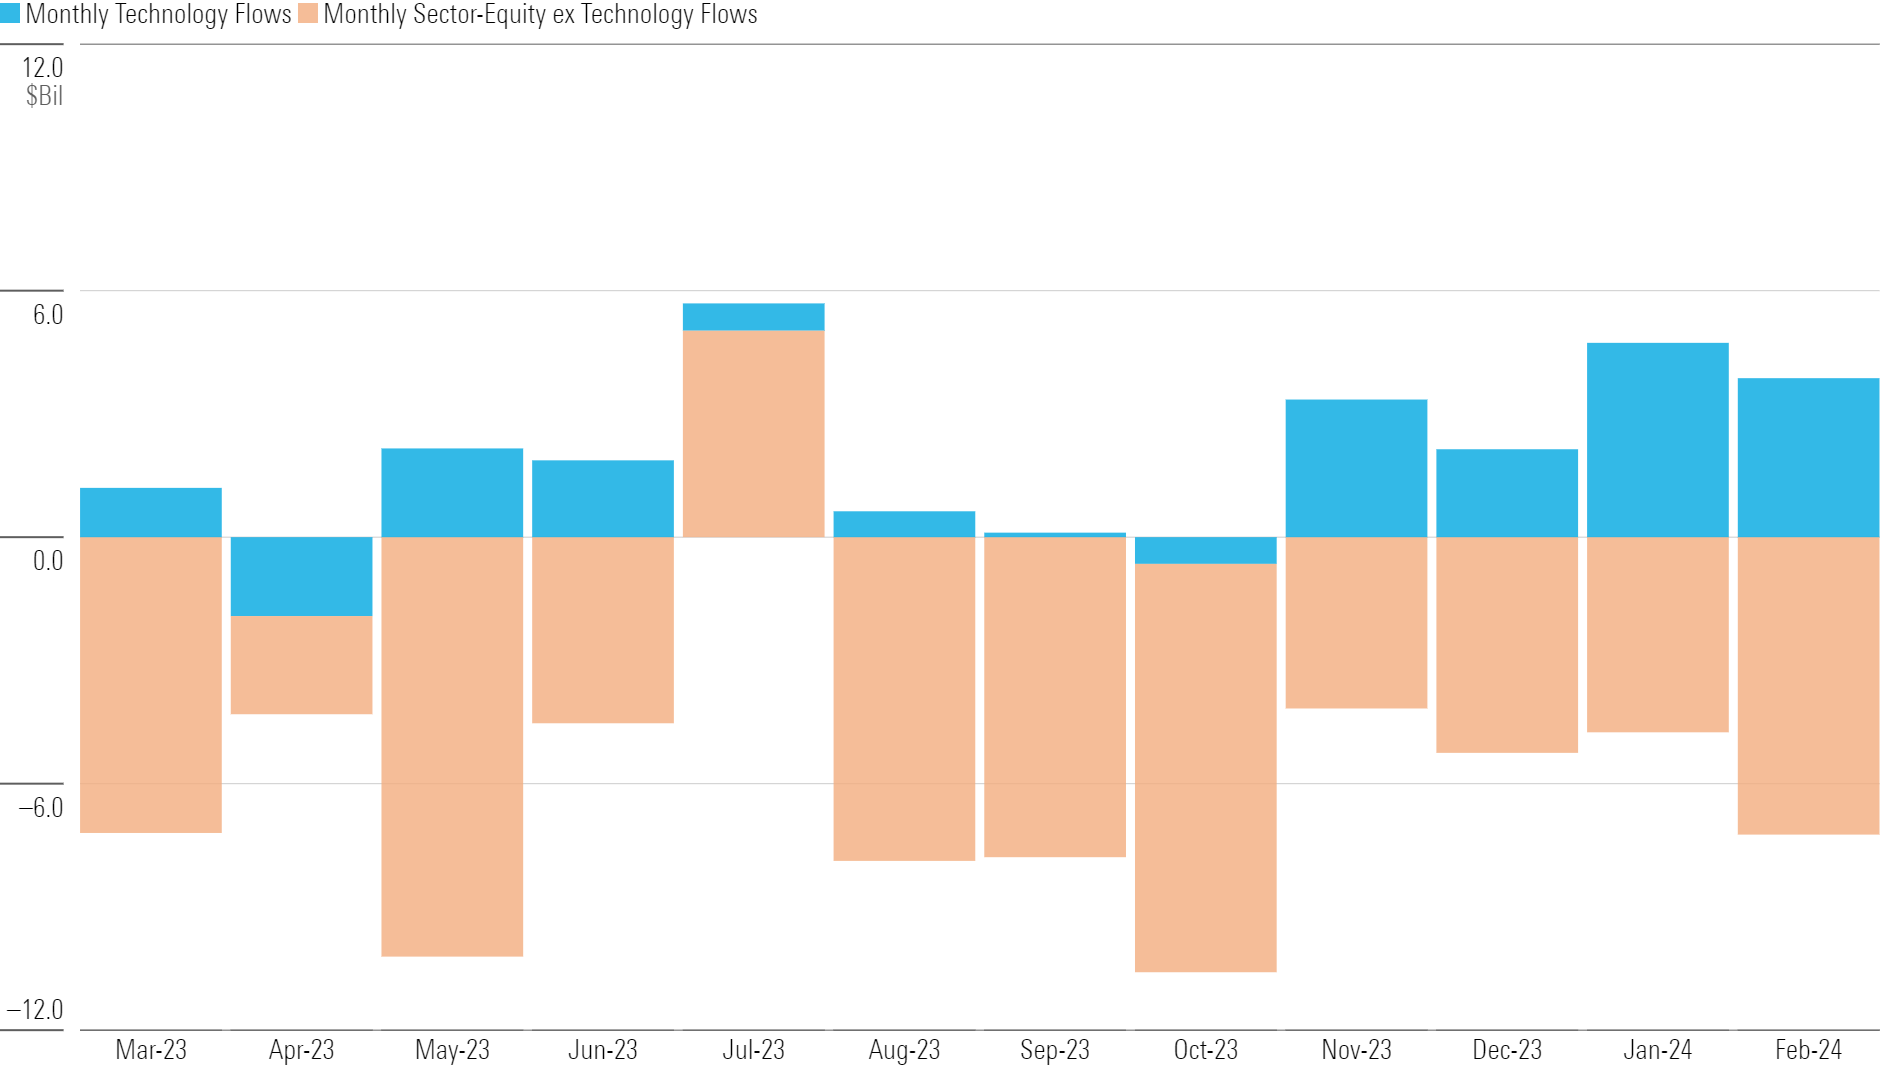 Stacked bar chart of monthly sector-equity flows.